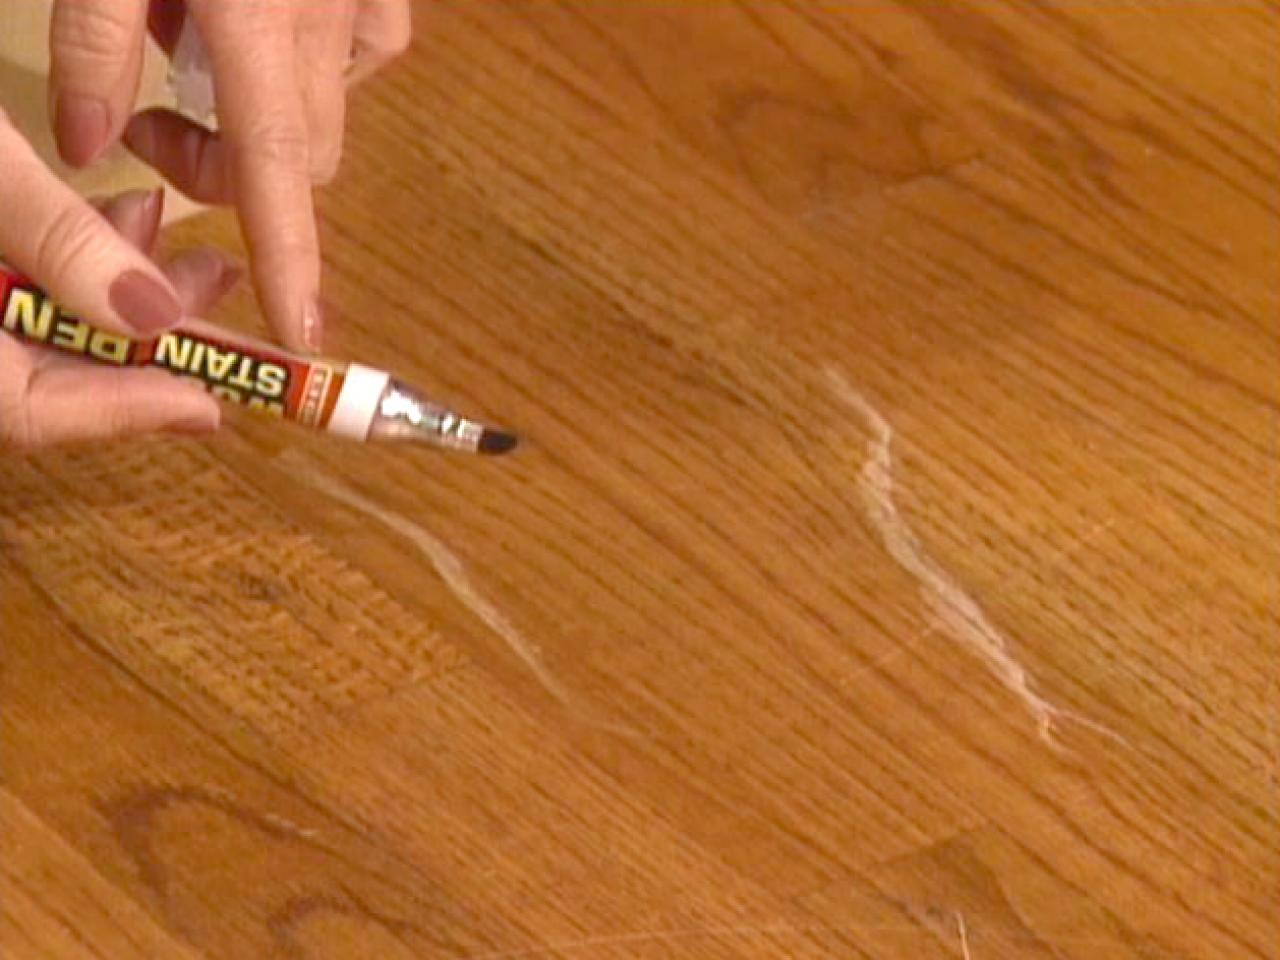 How To Touch Up Wood Floors Tos Diy, How To Clean Pen Ink Off Hardwood Floors